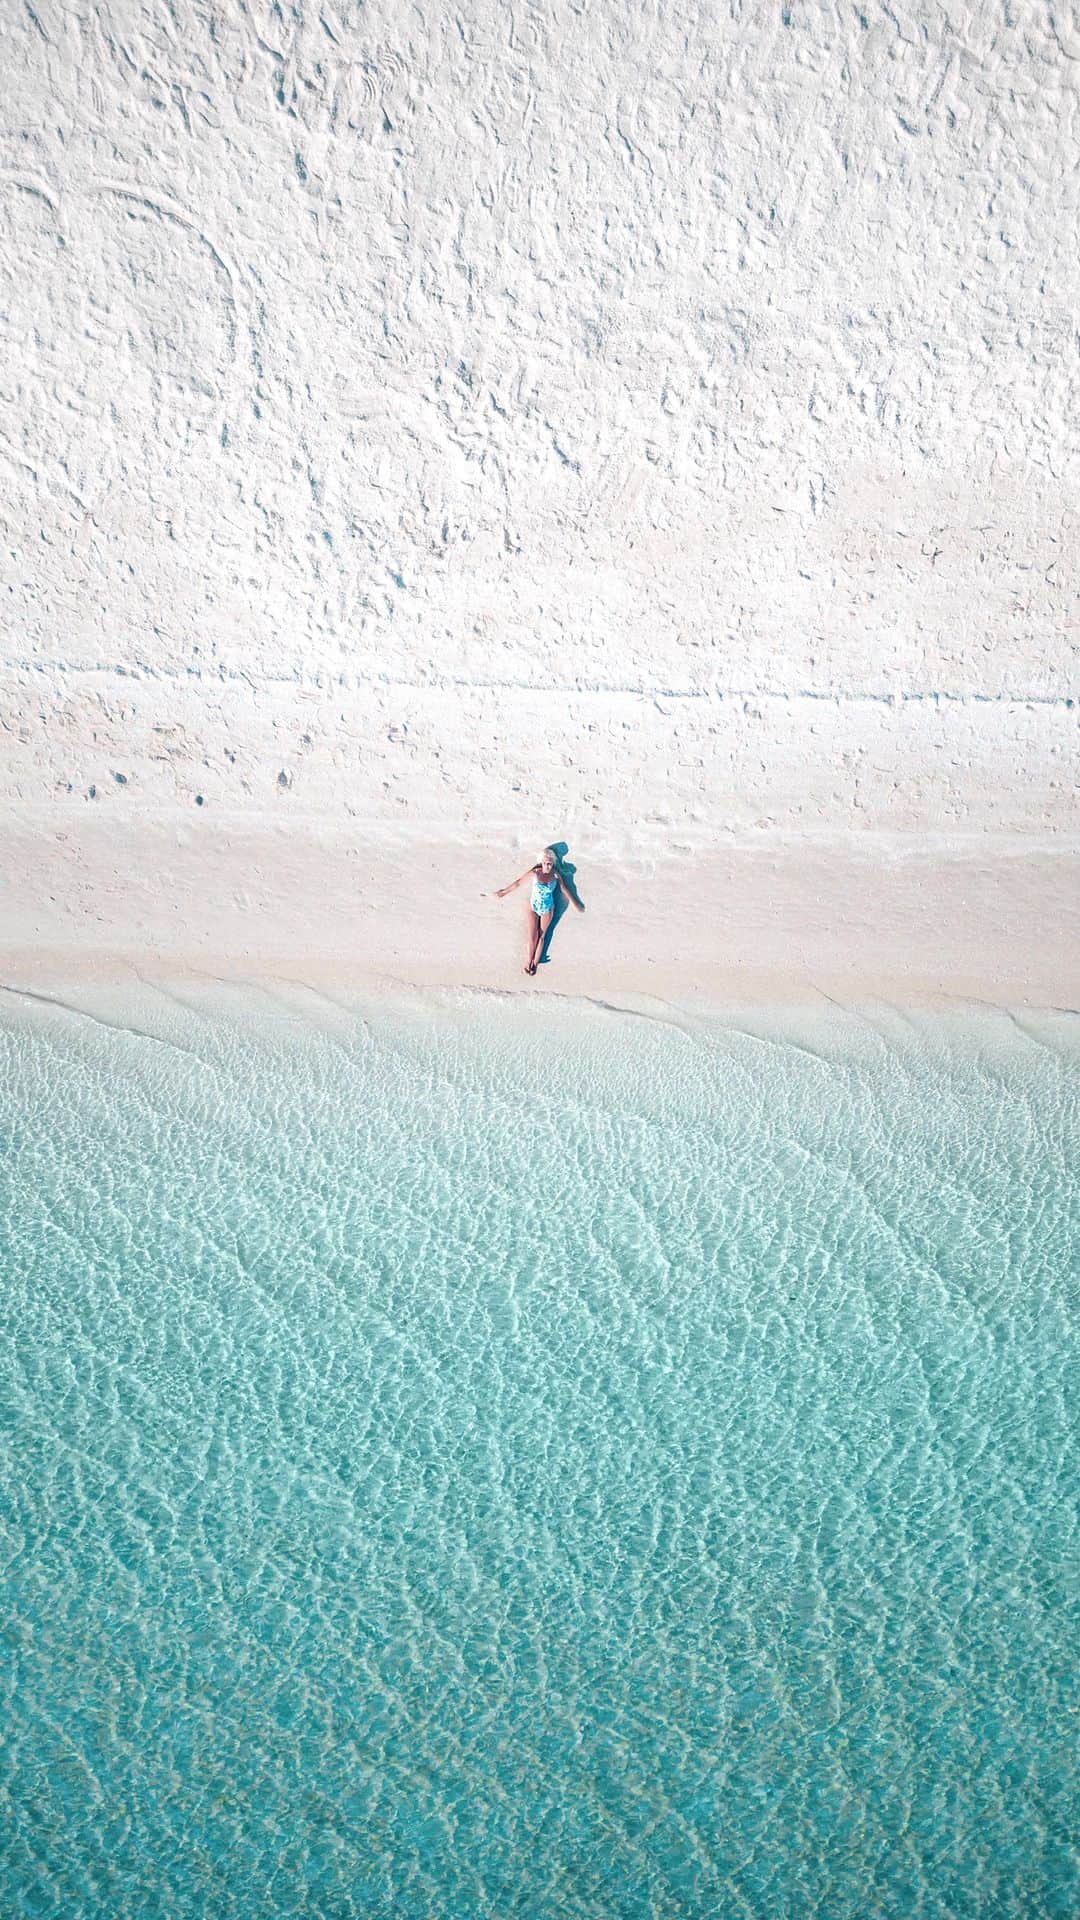 のインスタグラム：「Shark bay world heritage area has to be one of the most phenomenal, otherworldly and dreamiest places I’ve ever visited. Its biodiversity makes it incredibly unique and a great place for wildlife spotting. Here are my top recommendations for must visit spots and experiences  🐬 Monkey Mia - home to 3000 wild Indo Pacific bottlenose dolphins that visit and forage along the coastline daily. Start your day with the dolphin experience where you’ll get to see them up close. This experience is run by the rangers to ensure the dolphins are protected. My personal favorite is exploring the marine park with @aristocat2cruises on their 18m sailing catamaran where you’ll meet local dolphins, maybe even dugongs if you’re lucky and so much more. @aristocat2cruises have been doing some much needed work restoring the sea grass here to recover damage from the 2011 heatwave to help protect the dugongs, their food source and the entire delicate ecosystem.  🐬 Francois Peron National Park - take a 4WD tour with the best @sharkbaycoastaltours and take in the breathtaking views where the Pindan red soil meets the turquoise waters. It’s full of visual contrasts and beauty, that’s teeming with marine life. From the top of the red cliffs we saw many varieties of sharks, rays and dolphins right on the shore. This park can only be accessed by 4WD and can be tricky to navigate so it’s important to visit with someone like @sharkbaycoastaltours who has years of experience driving through this park. You’ll also get local knowledge and history about this incredibly special place.   🐬 Shell beach - one of only 2 beaches in the world to be made entirely of shells. It’s approx 60km long and the cockle shells can reach a depth of 10m. The hyper salinity helps to create this incredibly beautiful white shell beach.  🐬 Little Lagoon - This circular lagoon is such an amazing sight from above and sits right by the ocean. You can access the beach via 4WD and it’s a great spot for kayaking and paddle boarding.   Stay tuned for my blog where I’ll be sharing lots of pics and road trips tips for those who want to explore the many wonders of this coastline.   #wathedreamstate #seeaustralia」